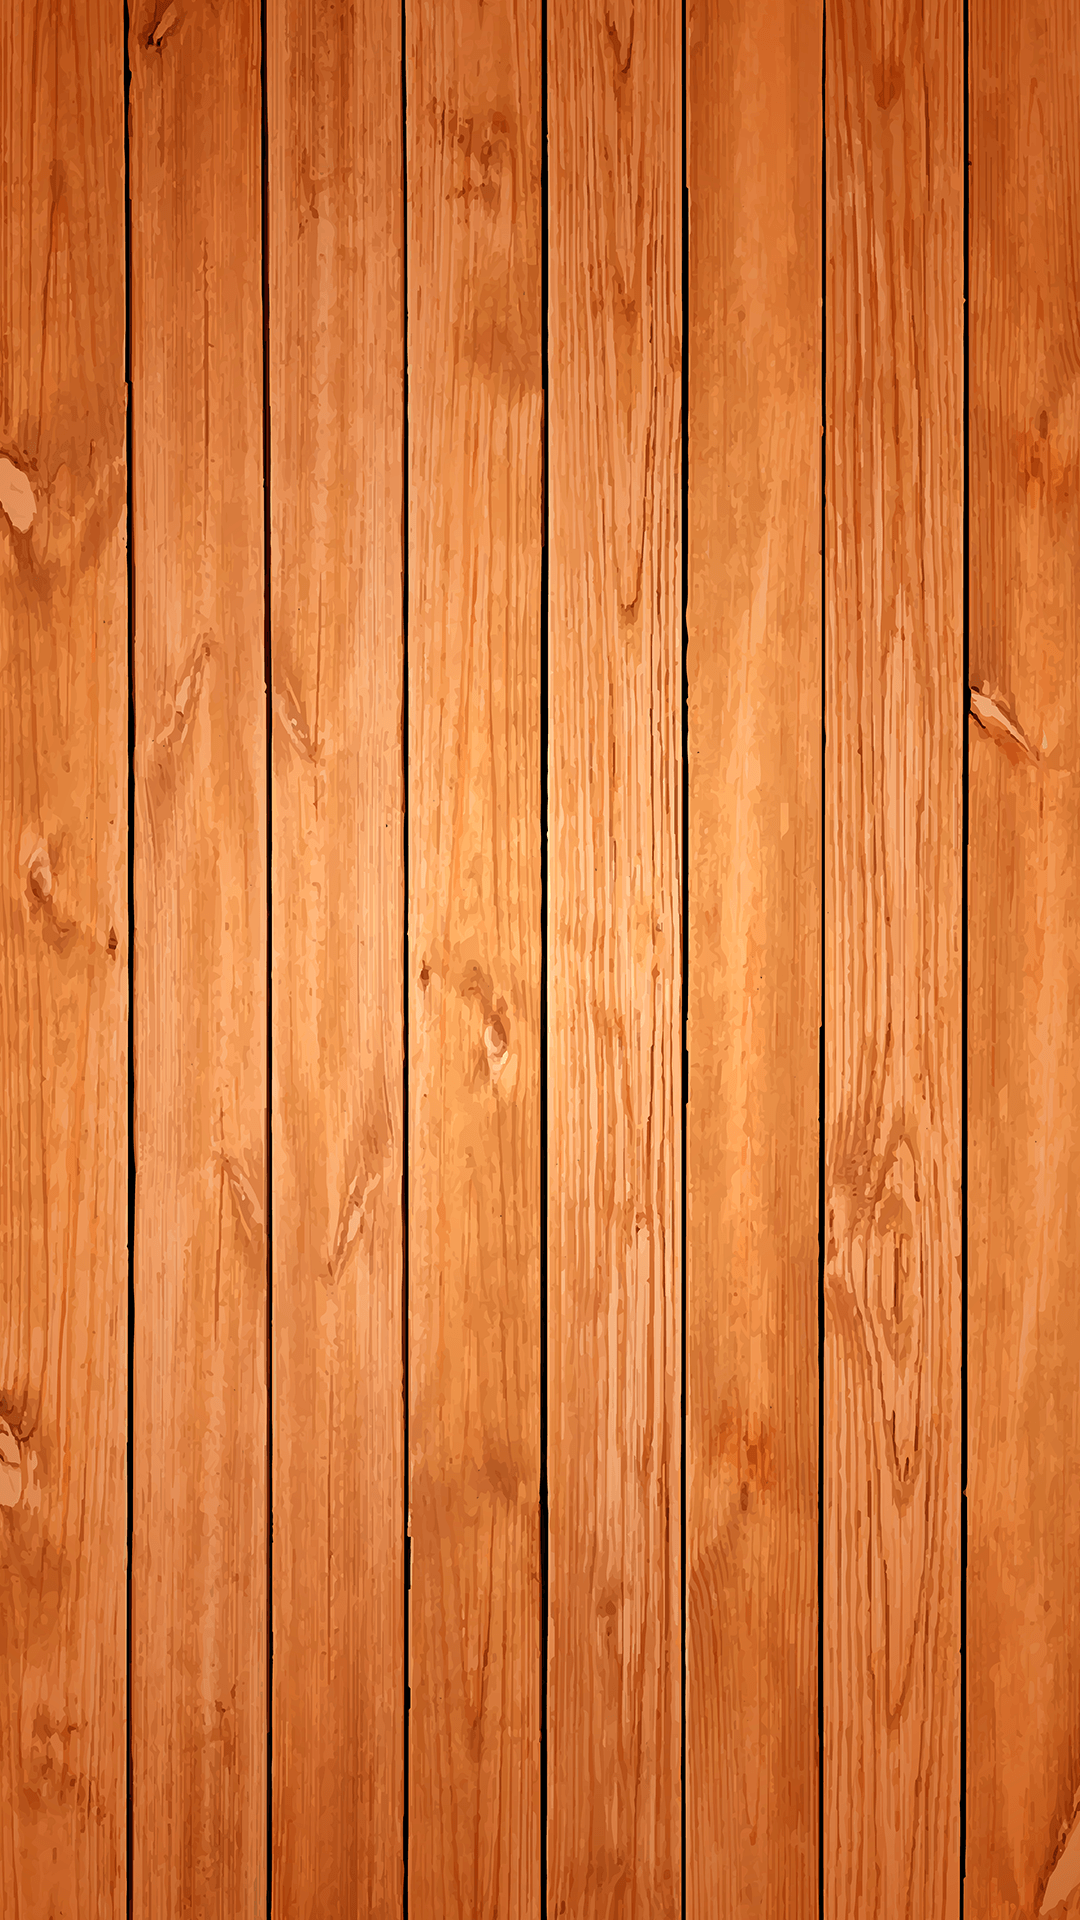 190 Artistic Wood HD Wallpapers and Backgrounds